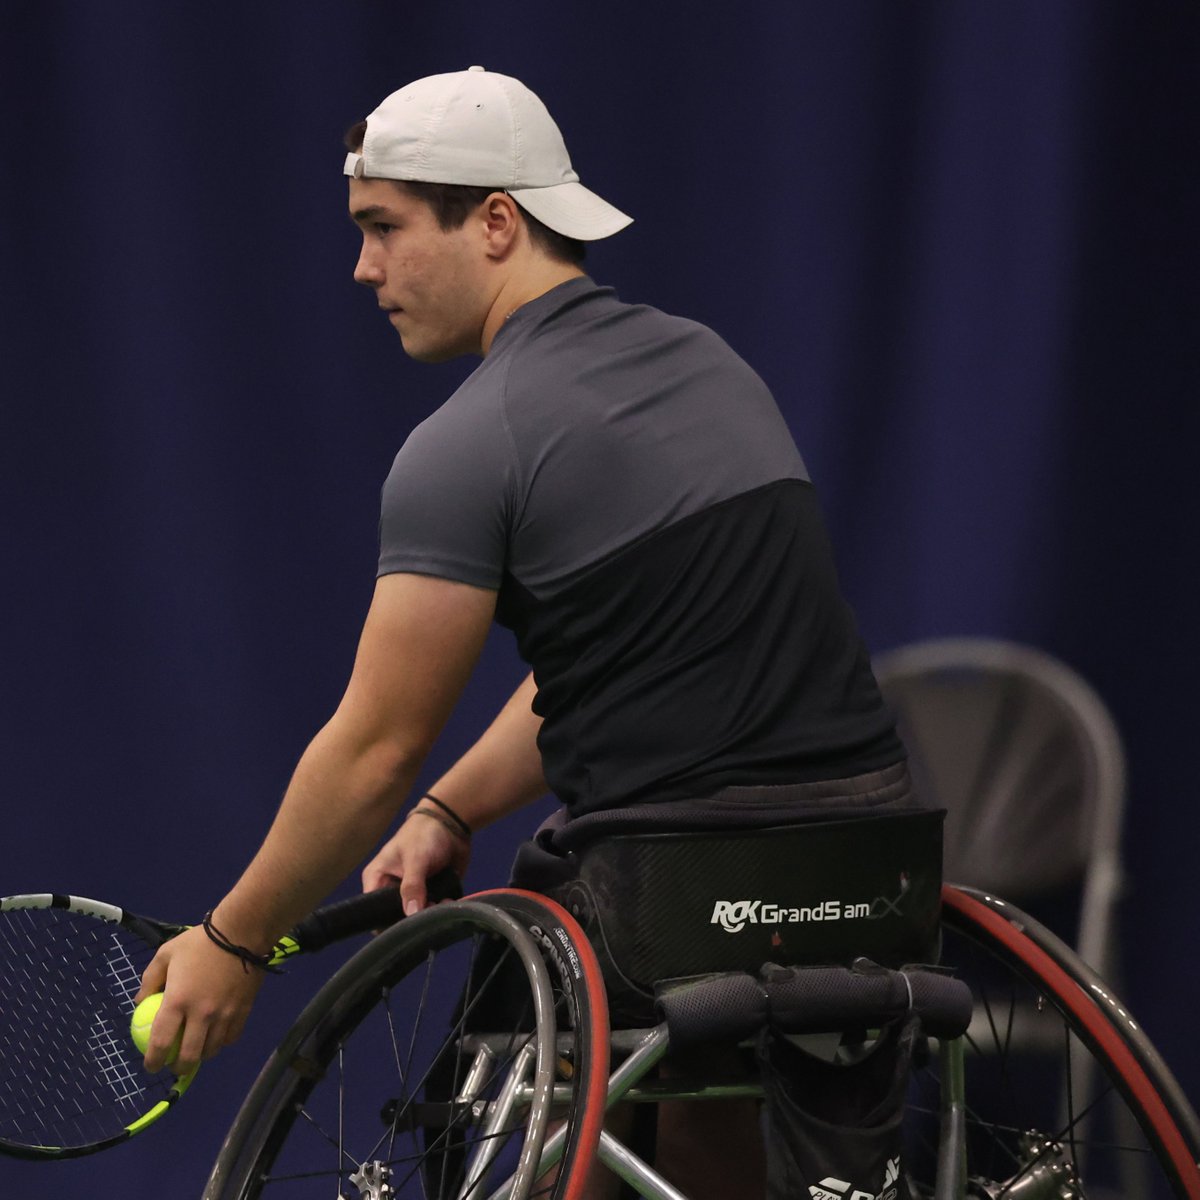 Into tomorrow's men's doubles semis... Third seeds @BenBartram3 @DahnonW advance to the Bolton Indoor ITF 2 last four after defeating Nicolas Charrier (FRA) & Sergei Lysov (ISR) 6-3, 6-4. #BackTheBrits 🇬🇧 | #wheelchairtennis | #BoltonIndoor